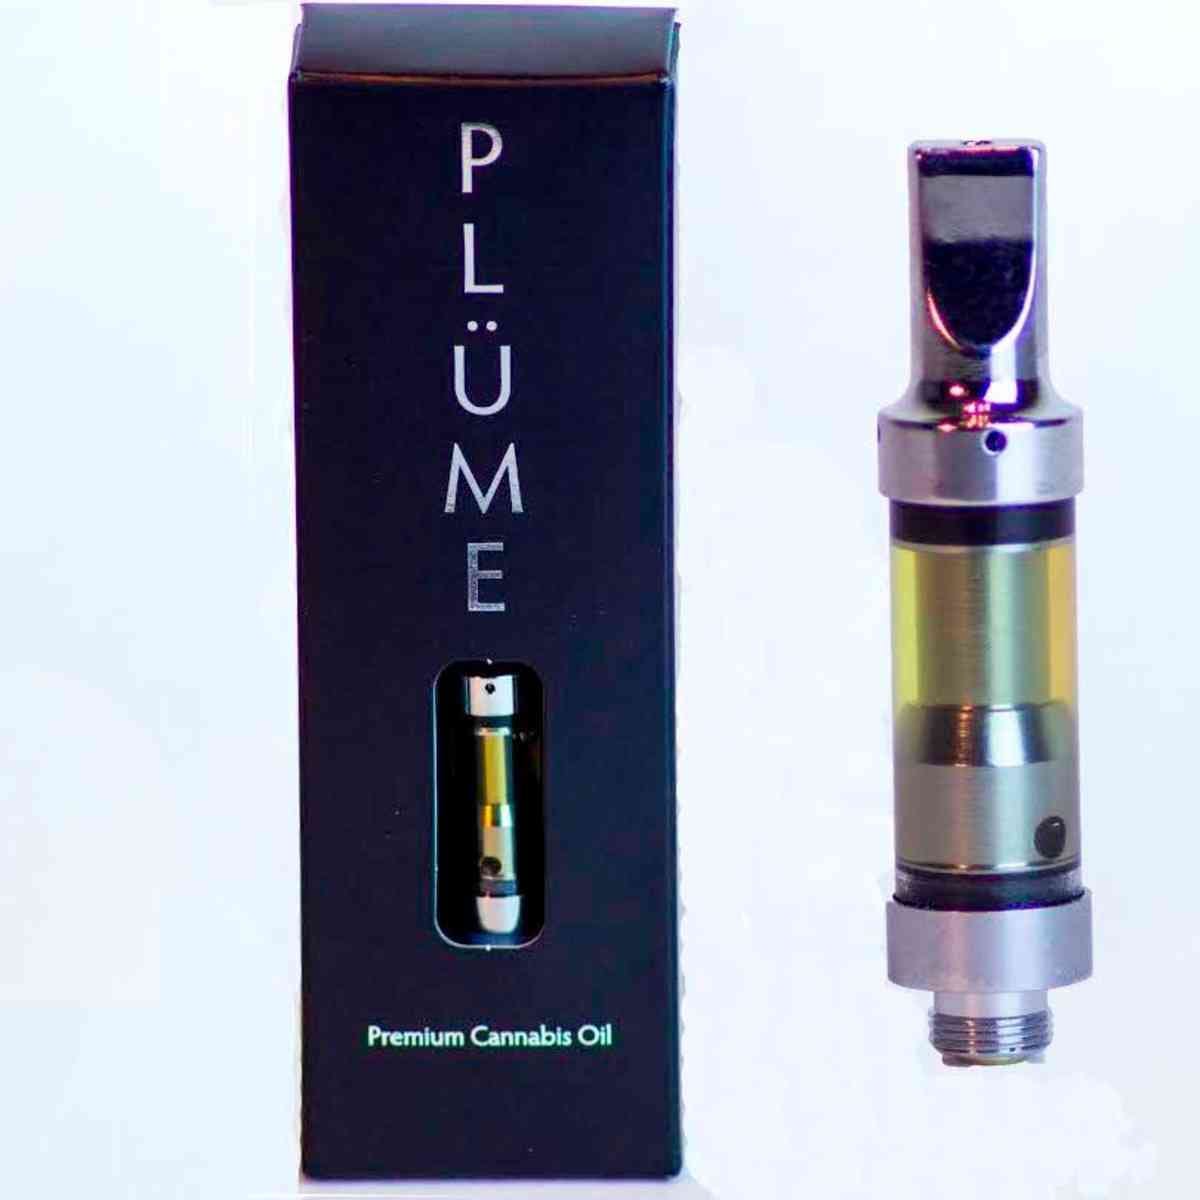 concentrate-pla-c2-9cme-750mg-cartridges-indicasativahybrid